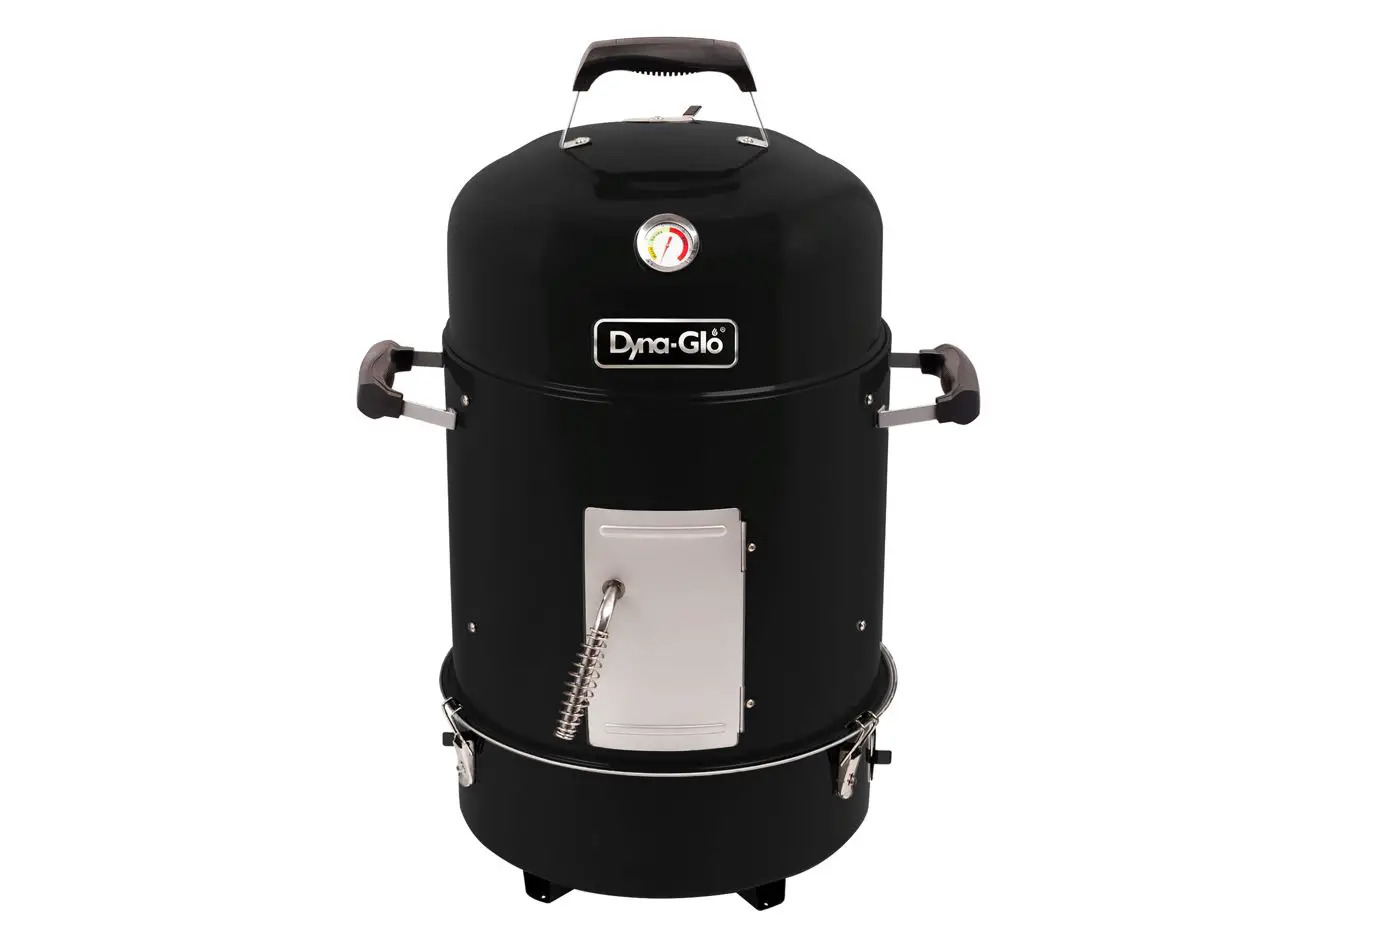 Dyna-Glo DGVS390BC Compact Vertical Charcoal Smoker & Grill